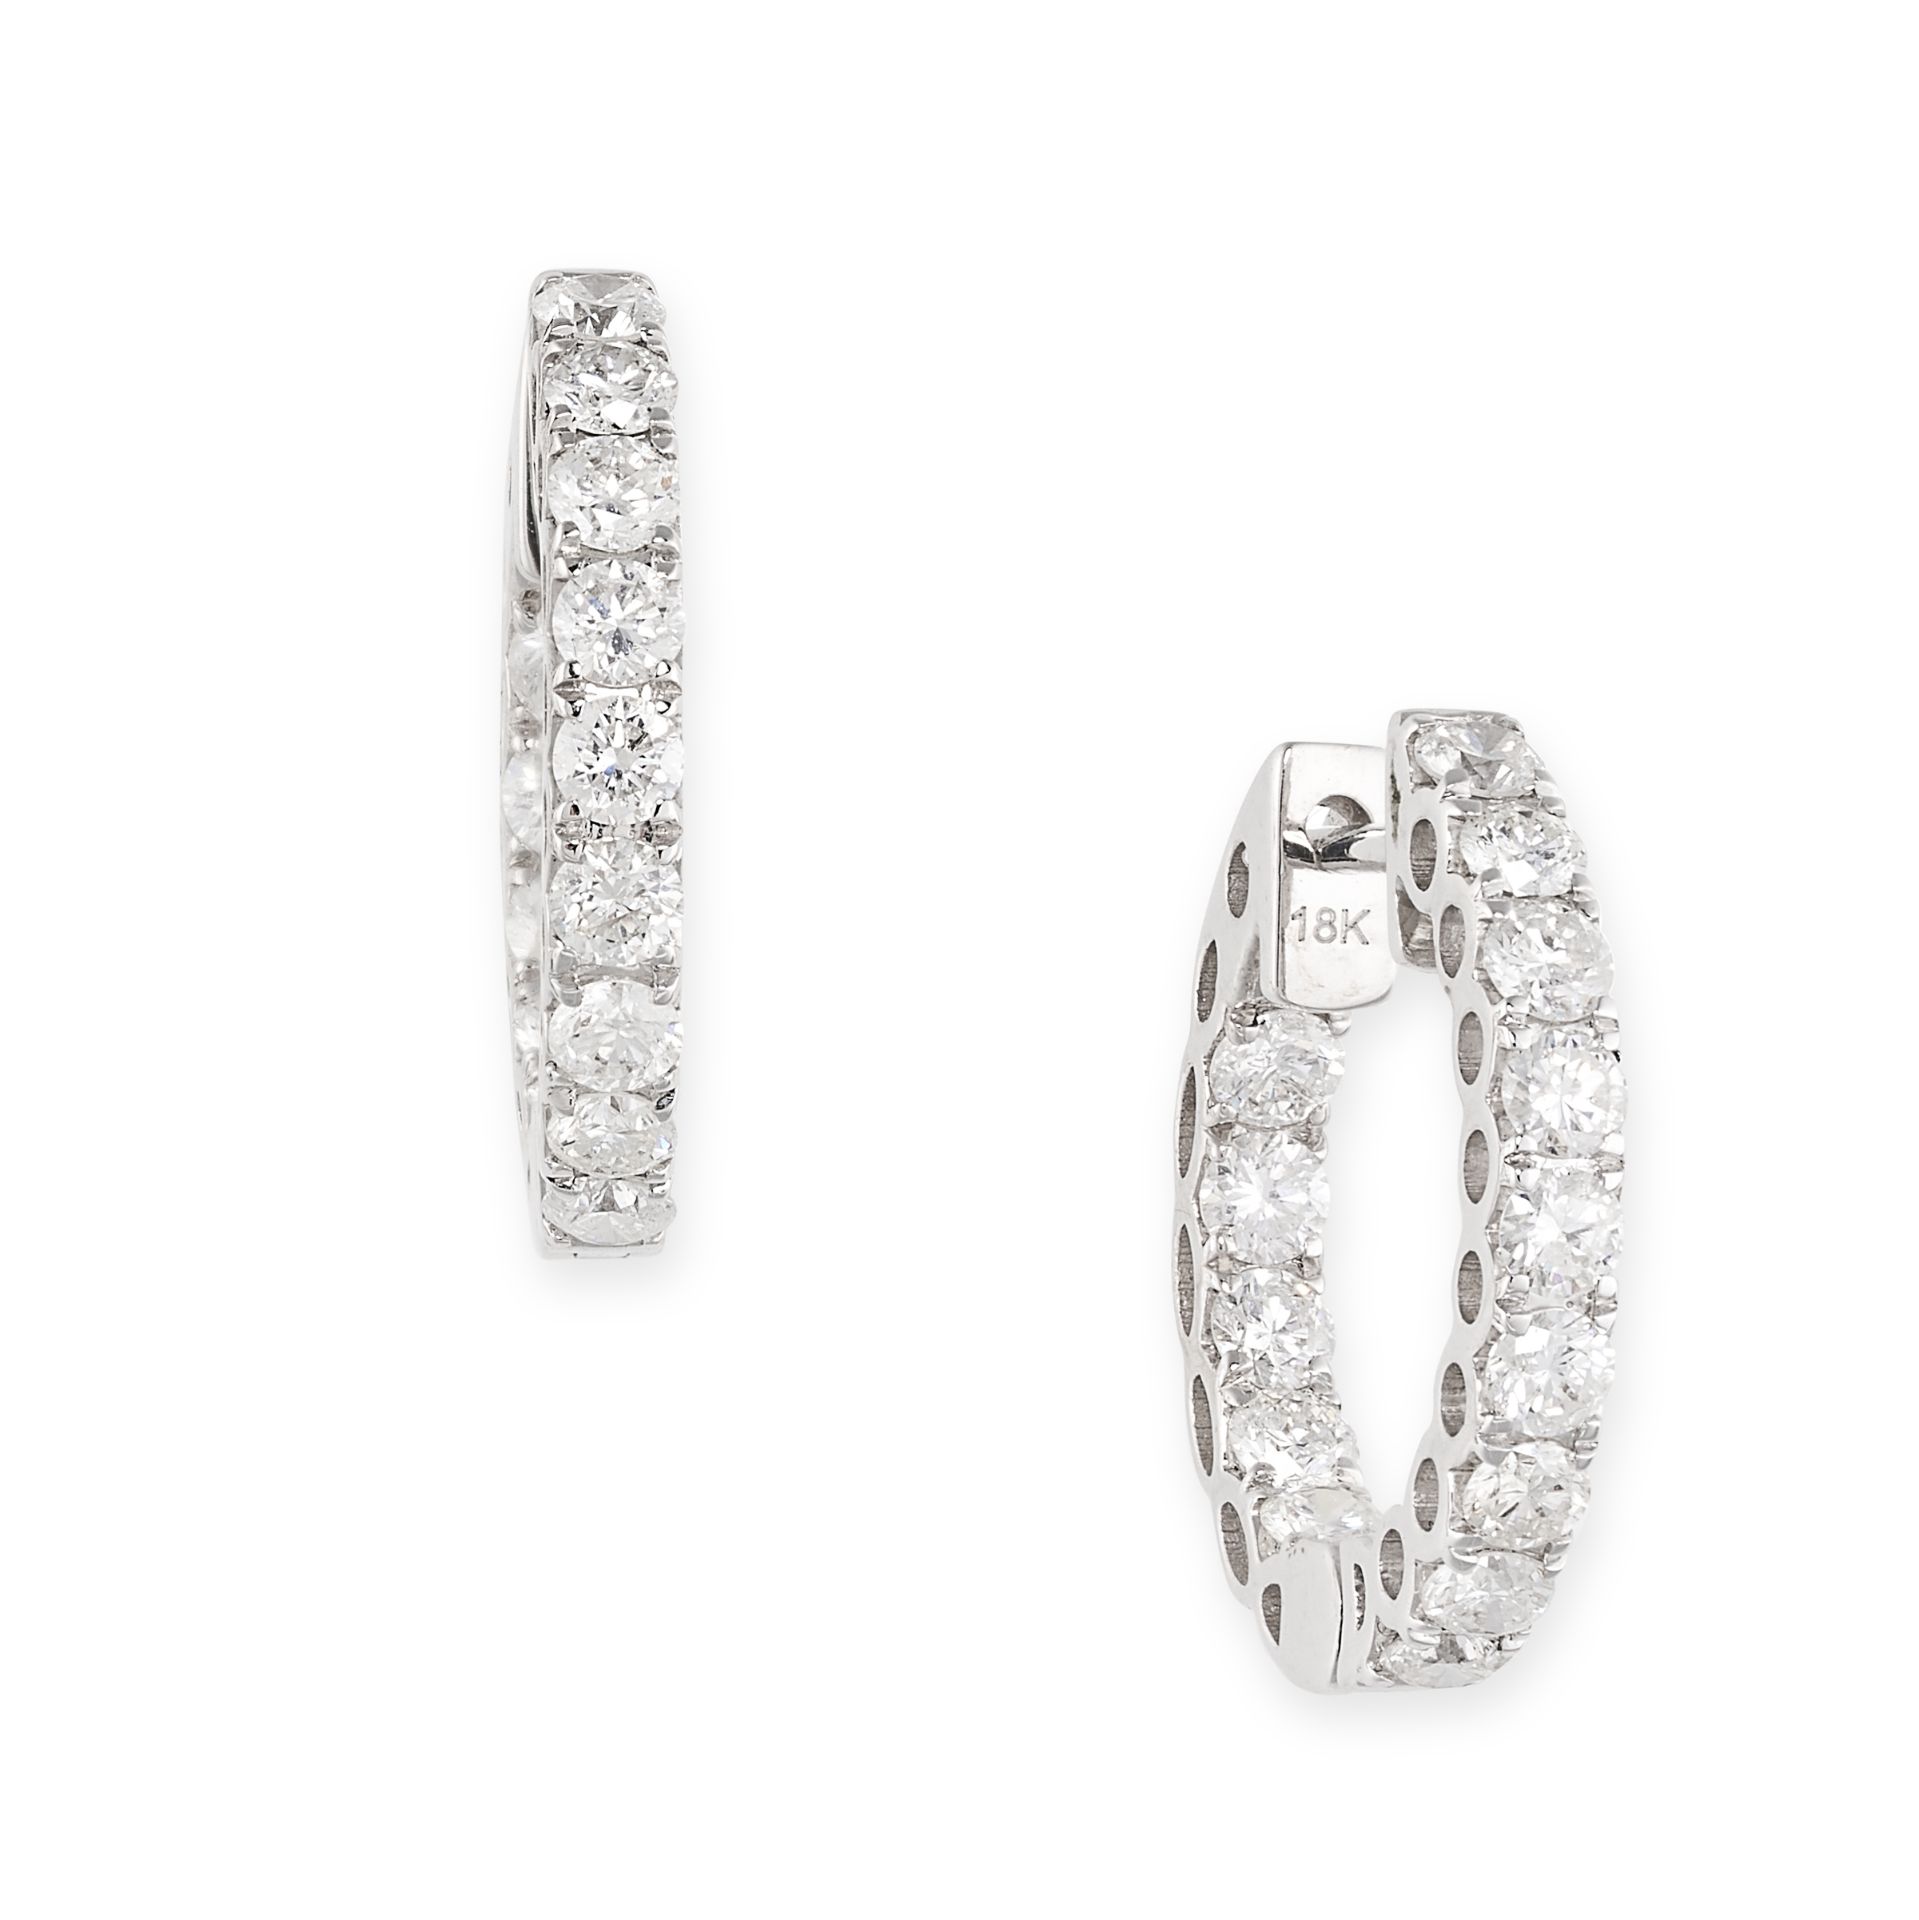 A PAIR OF DIAMOND HOOP EARRINGS in 18ct white gold, each designed as a full hoop, set with round cut